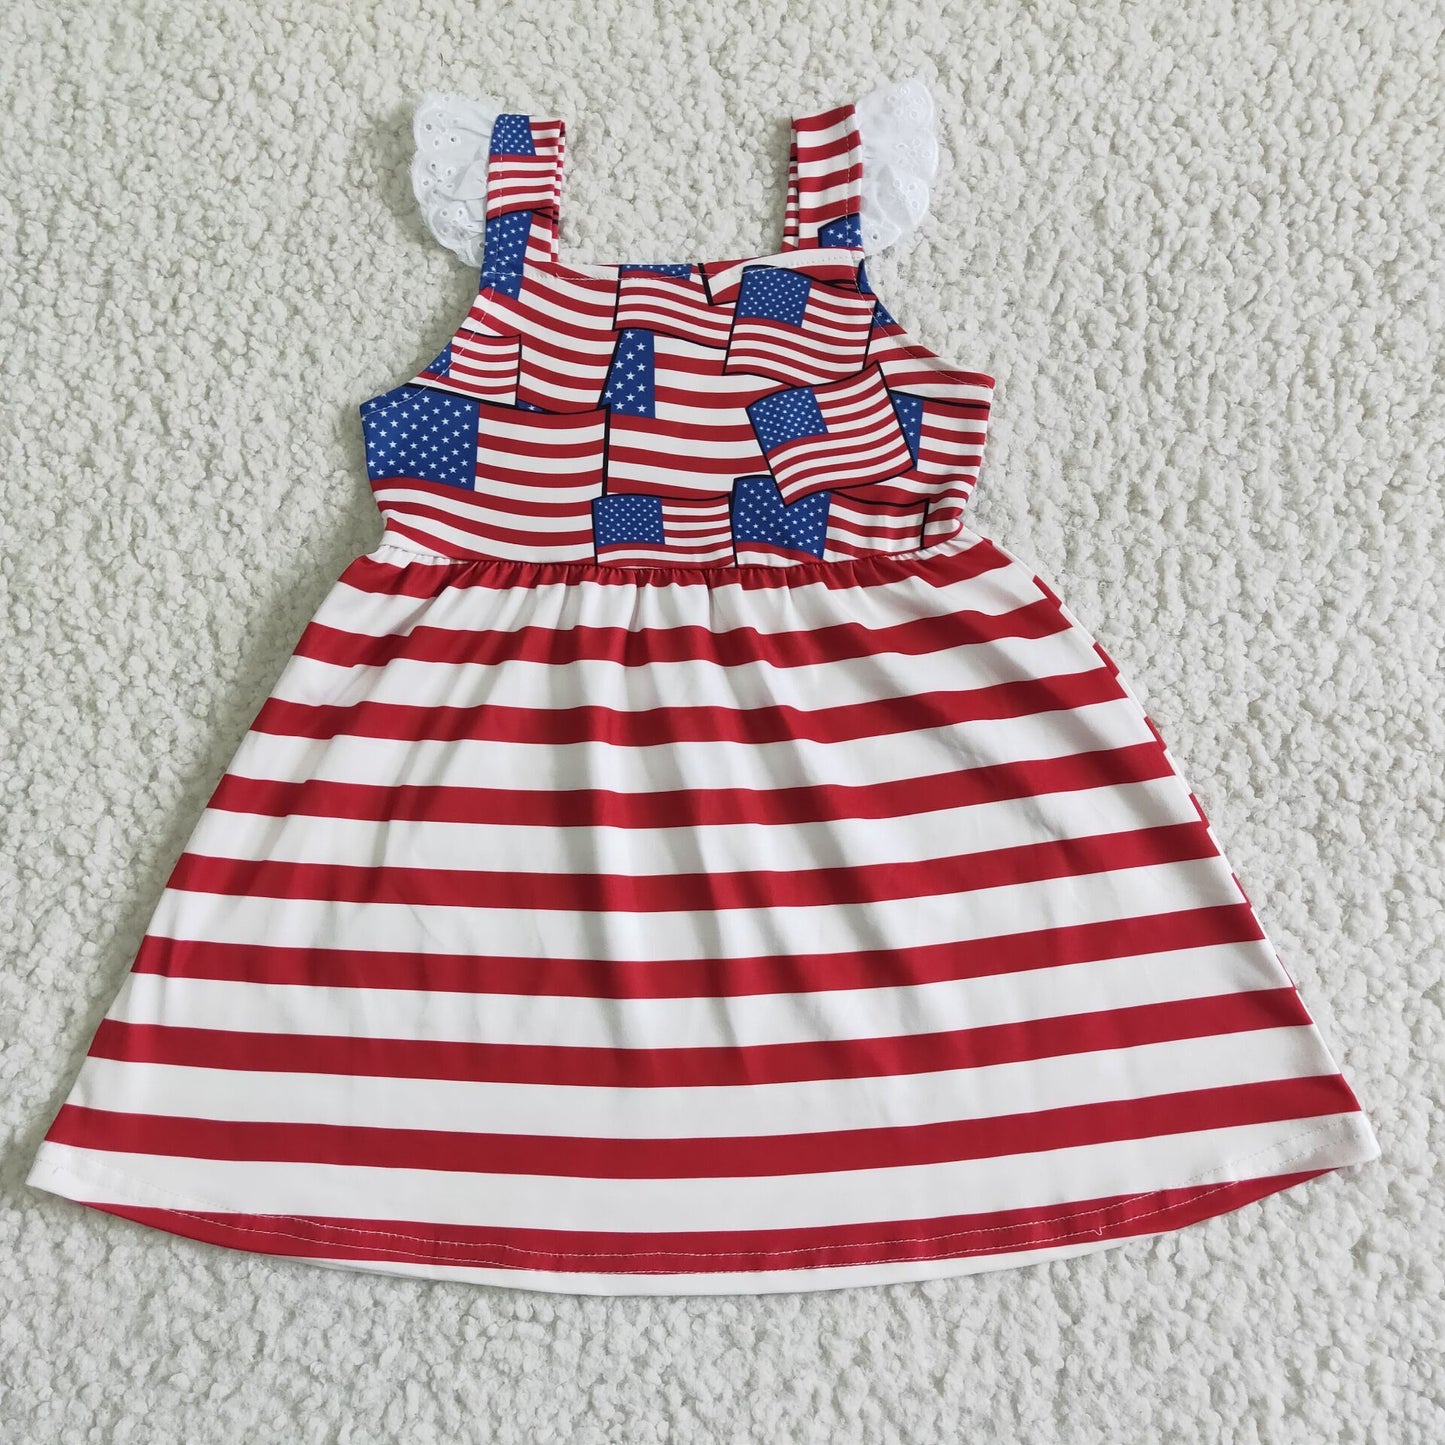 Girls blue cartoon July 4th outfit